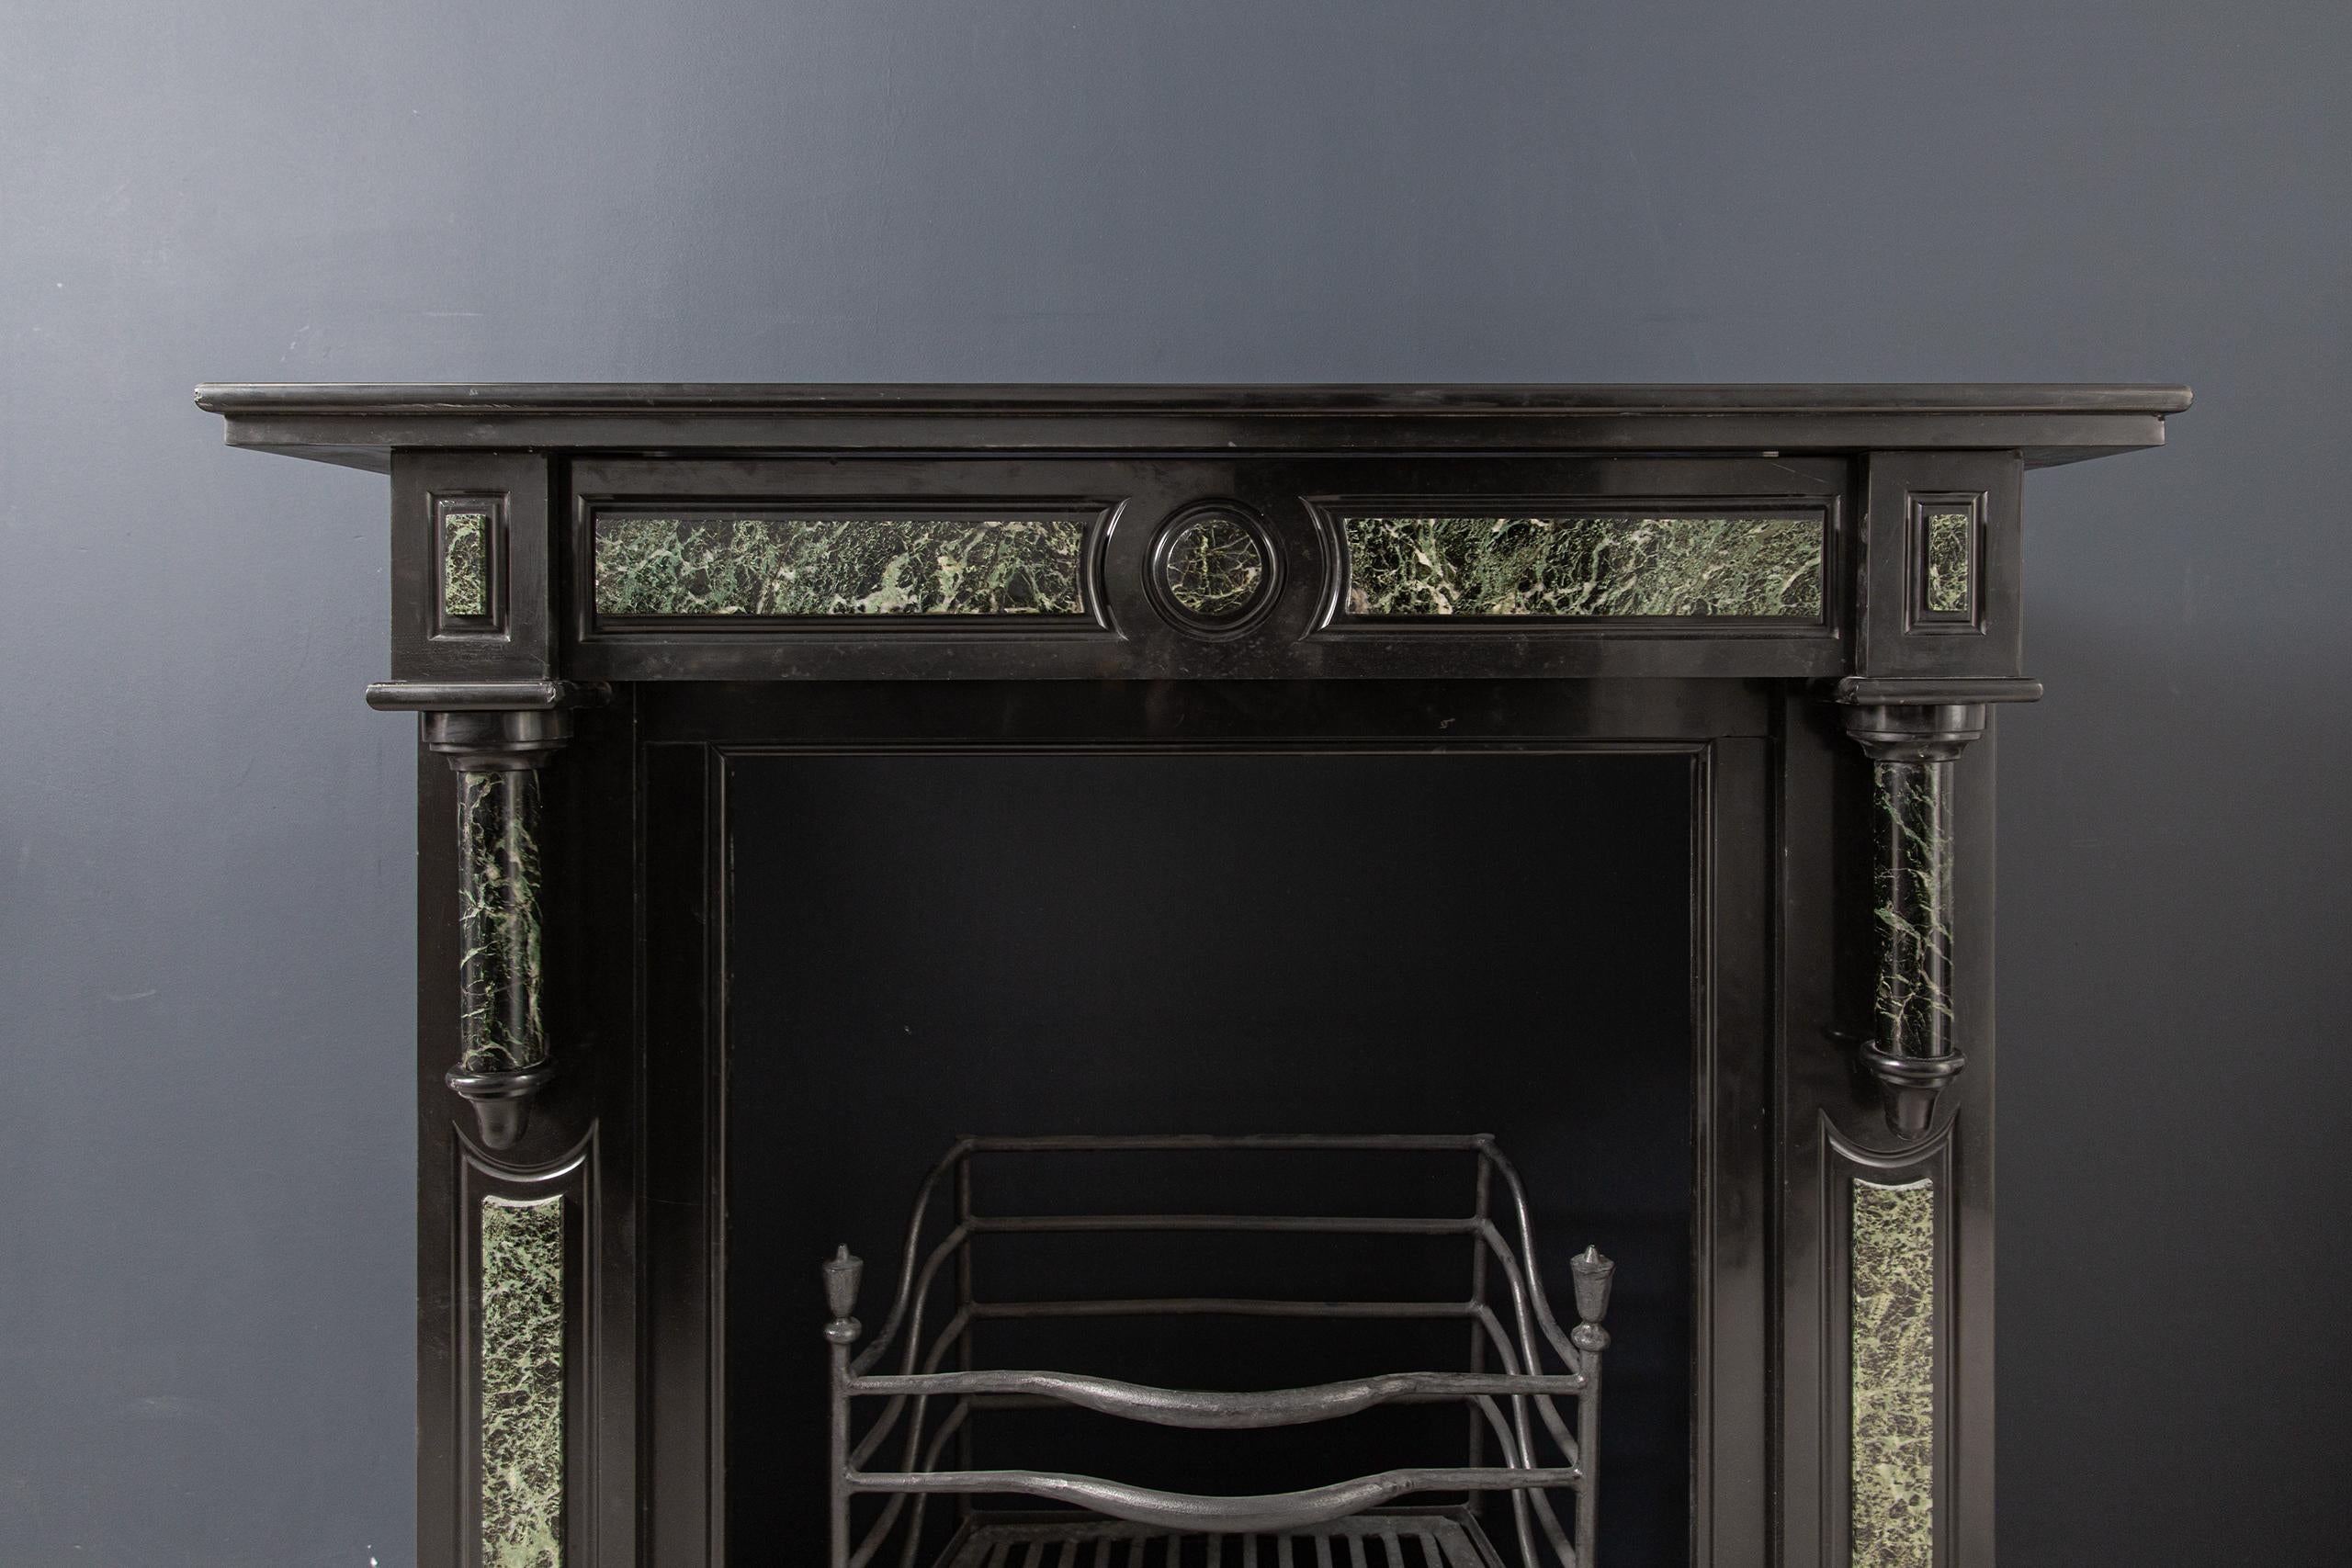 Antique black marble mantelpiece made of Noir de Mazy marble, the black gold. This fireplace is richly decorated with green marble inlays. The consoles are provided with green marble ornaments which hang on the front in front of the consoles. A